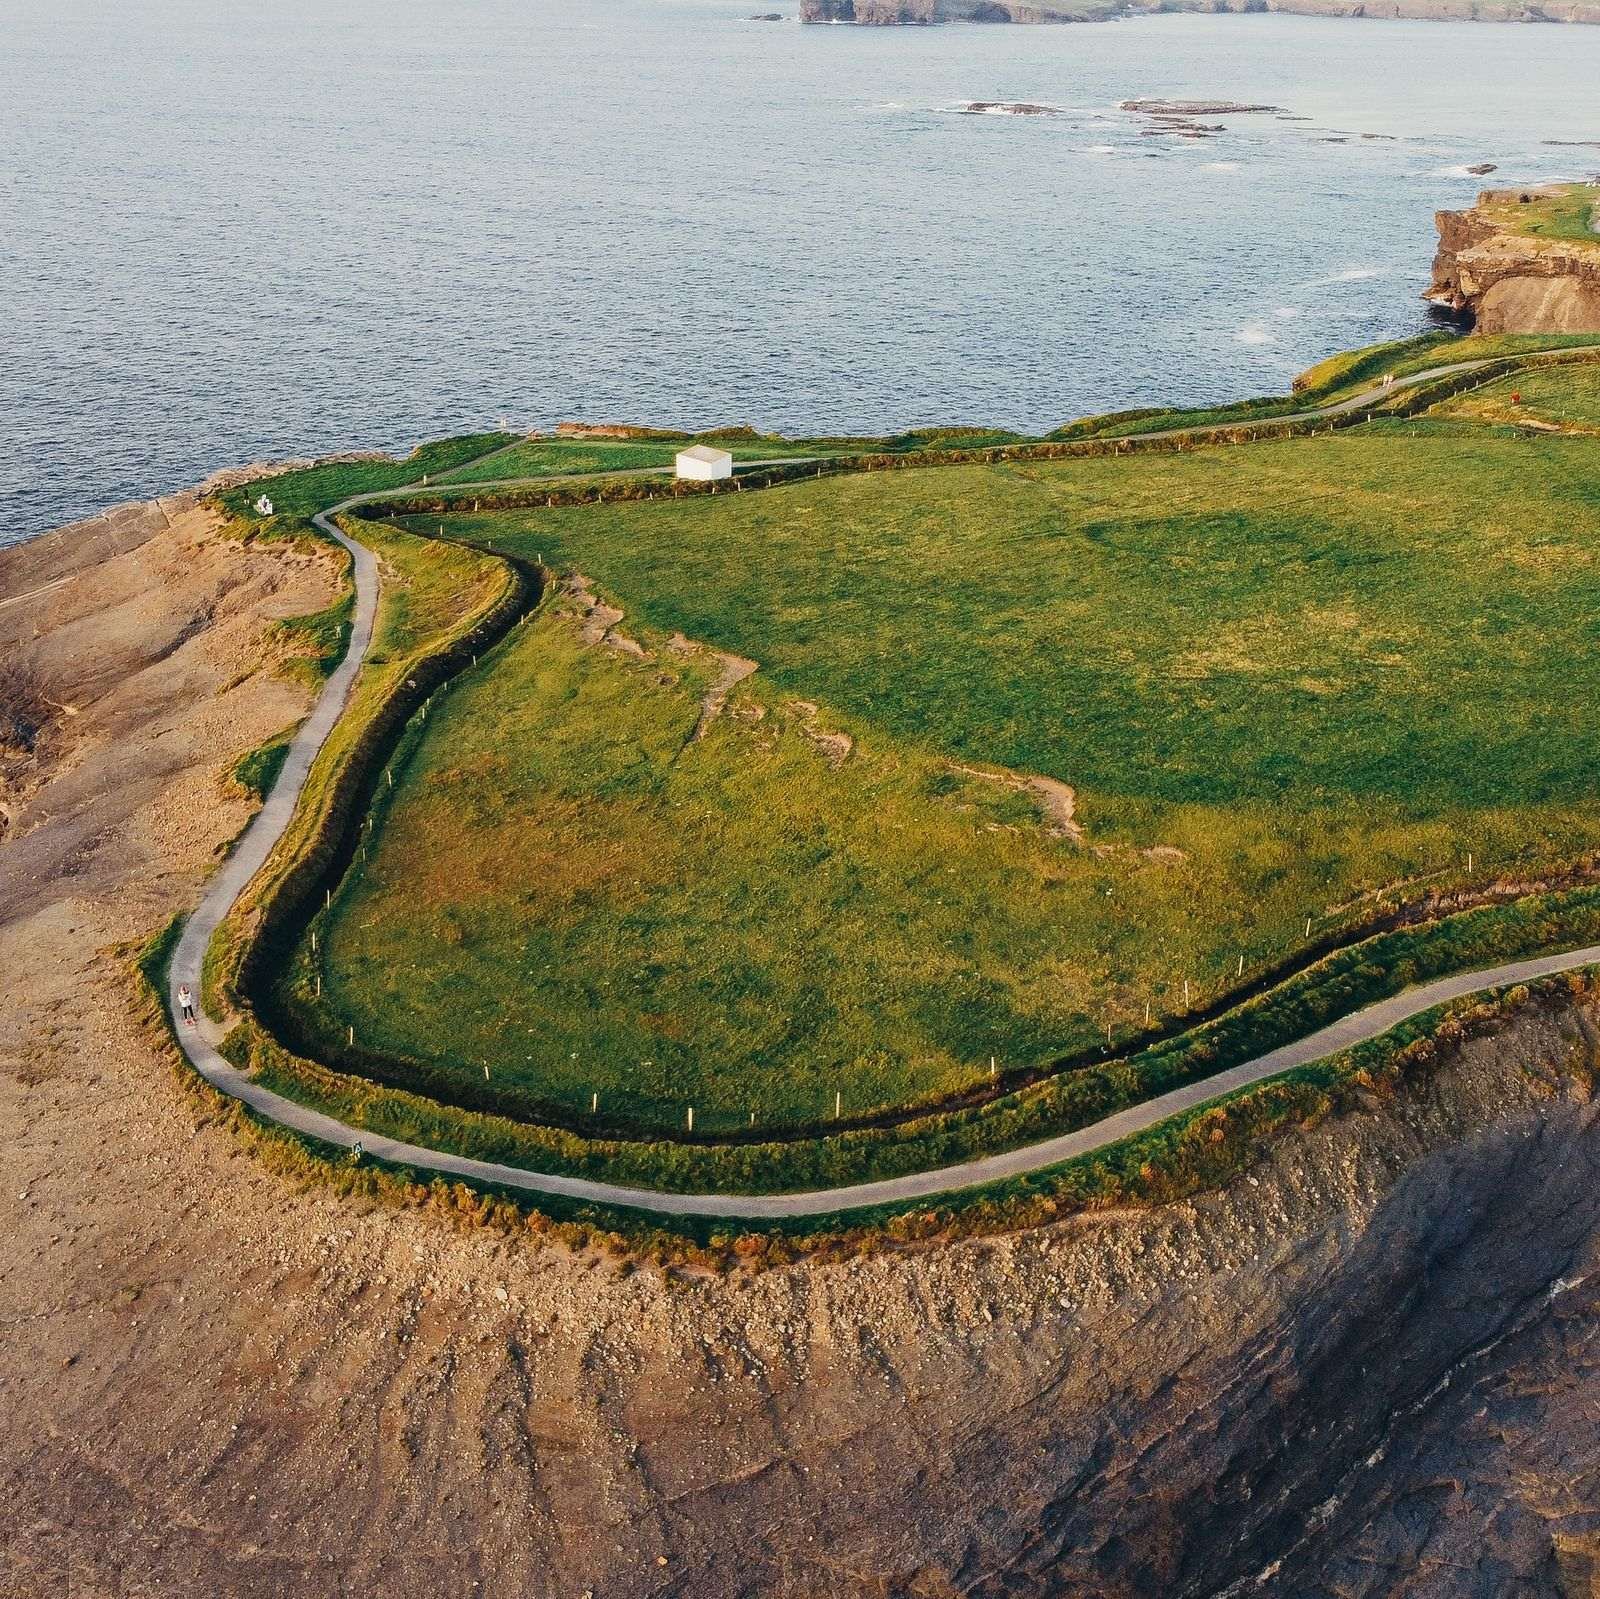 drone photo of a walking path following the edge of a grassy cliff with rockface leading to the water